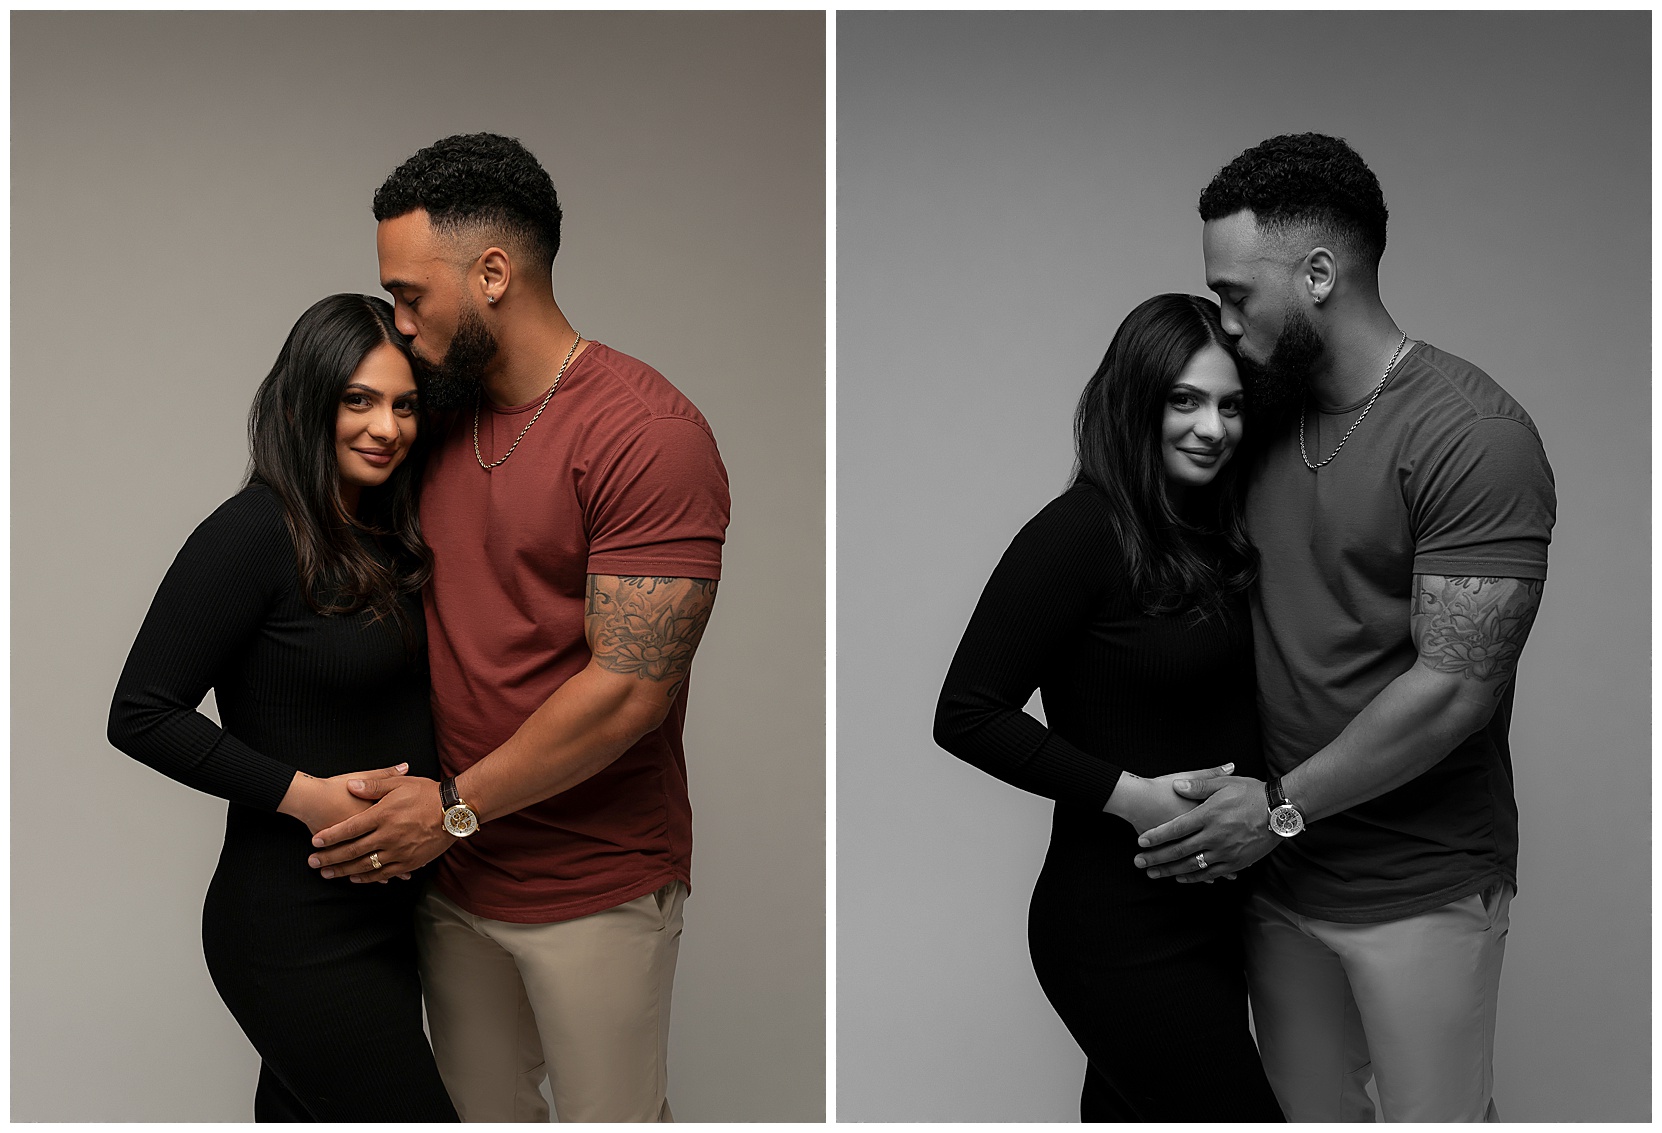 A set of two photos -- one in black and white and one in color -- of a man and a woman putting one of each of their hands over the woman's baby bump